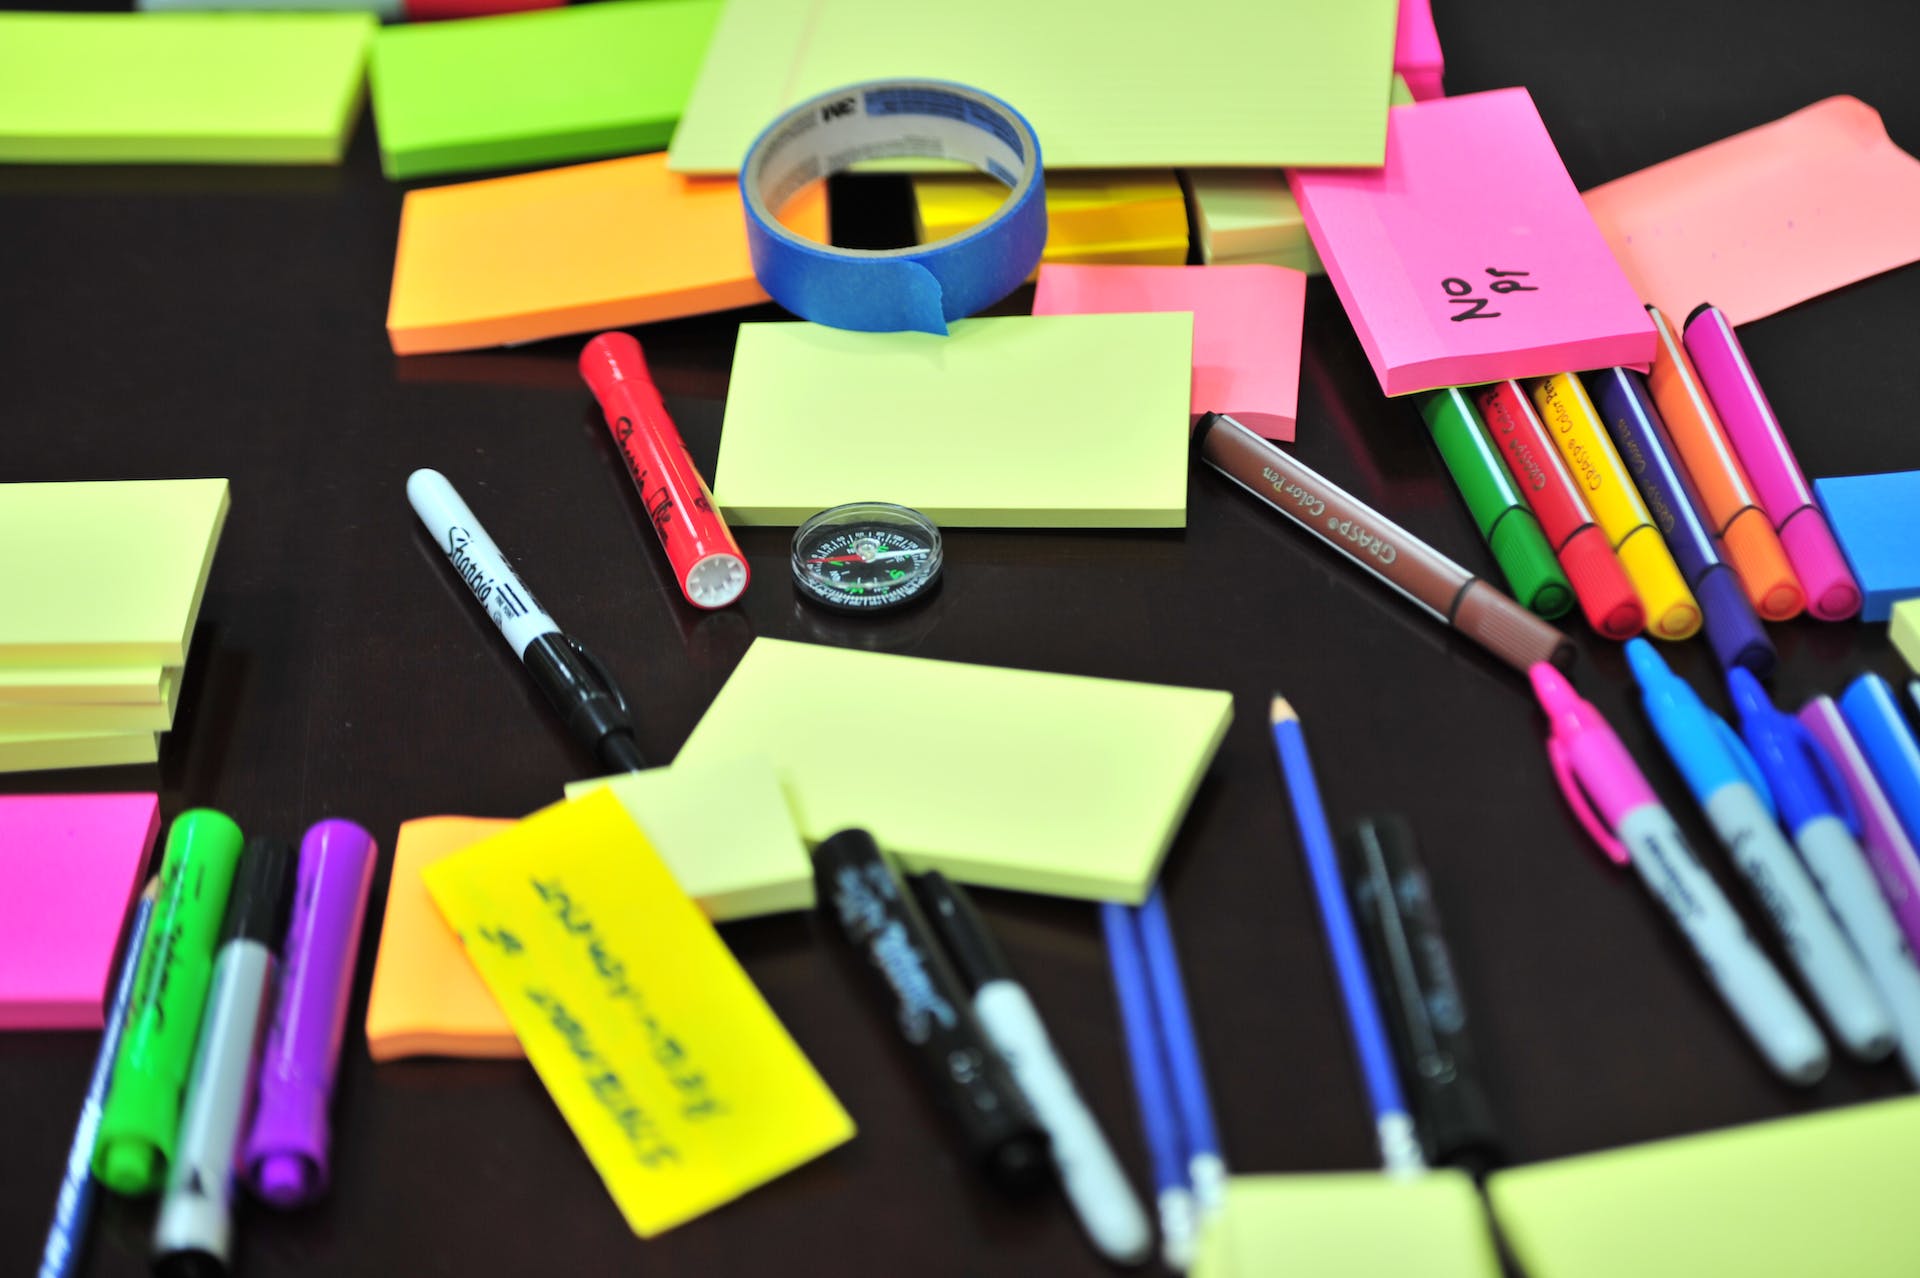 Sticky notes and pens scattered on a desk | Source: Pexels